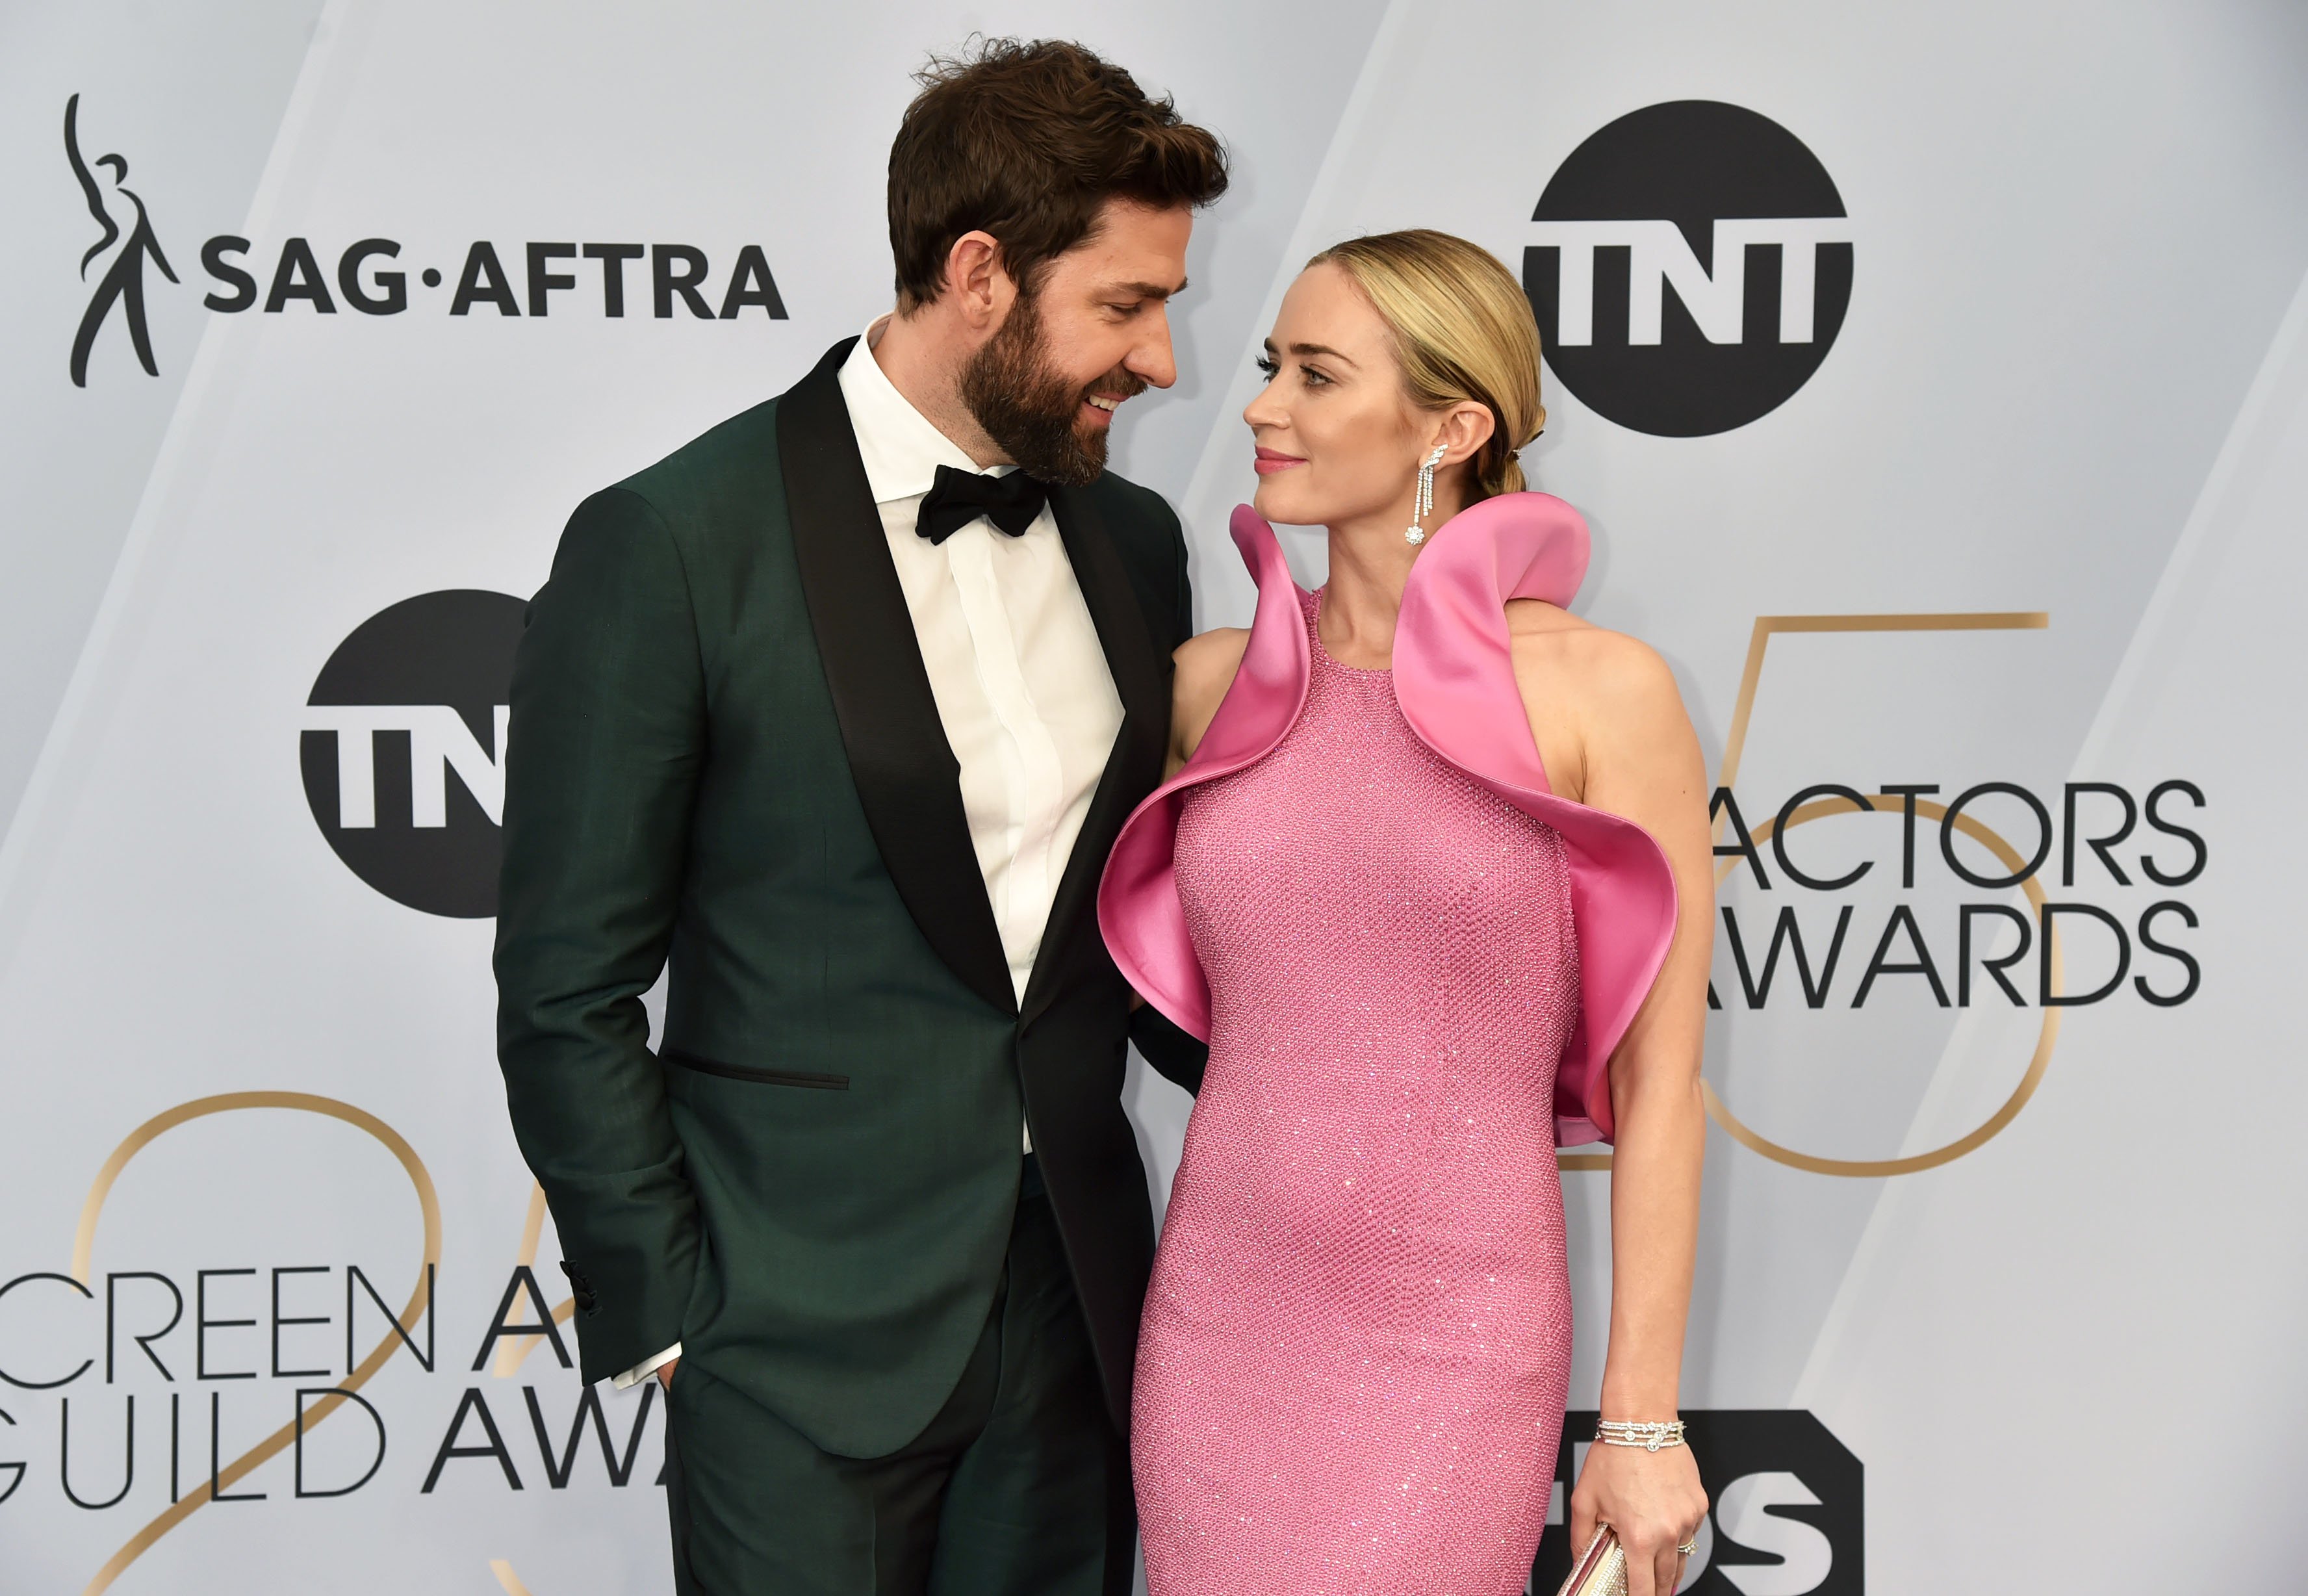 John Krasinski and Emily Blunt at The Shrine Auditorium on January 27, 2019, in Los Angeles, California. I Source: Getty Images